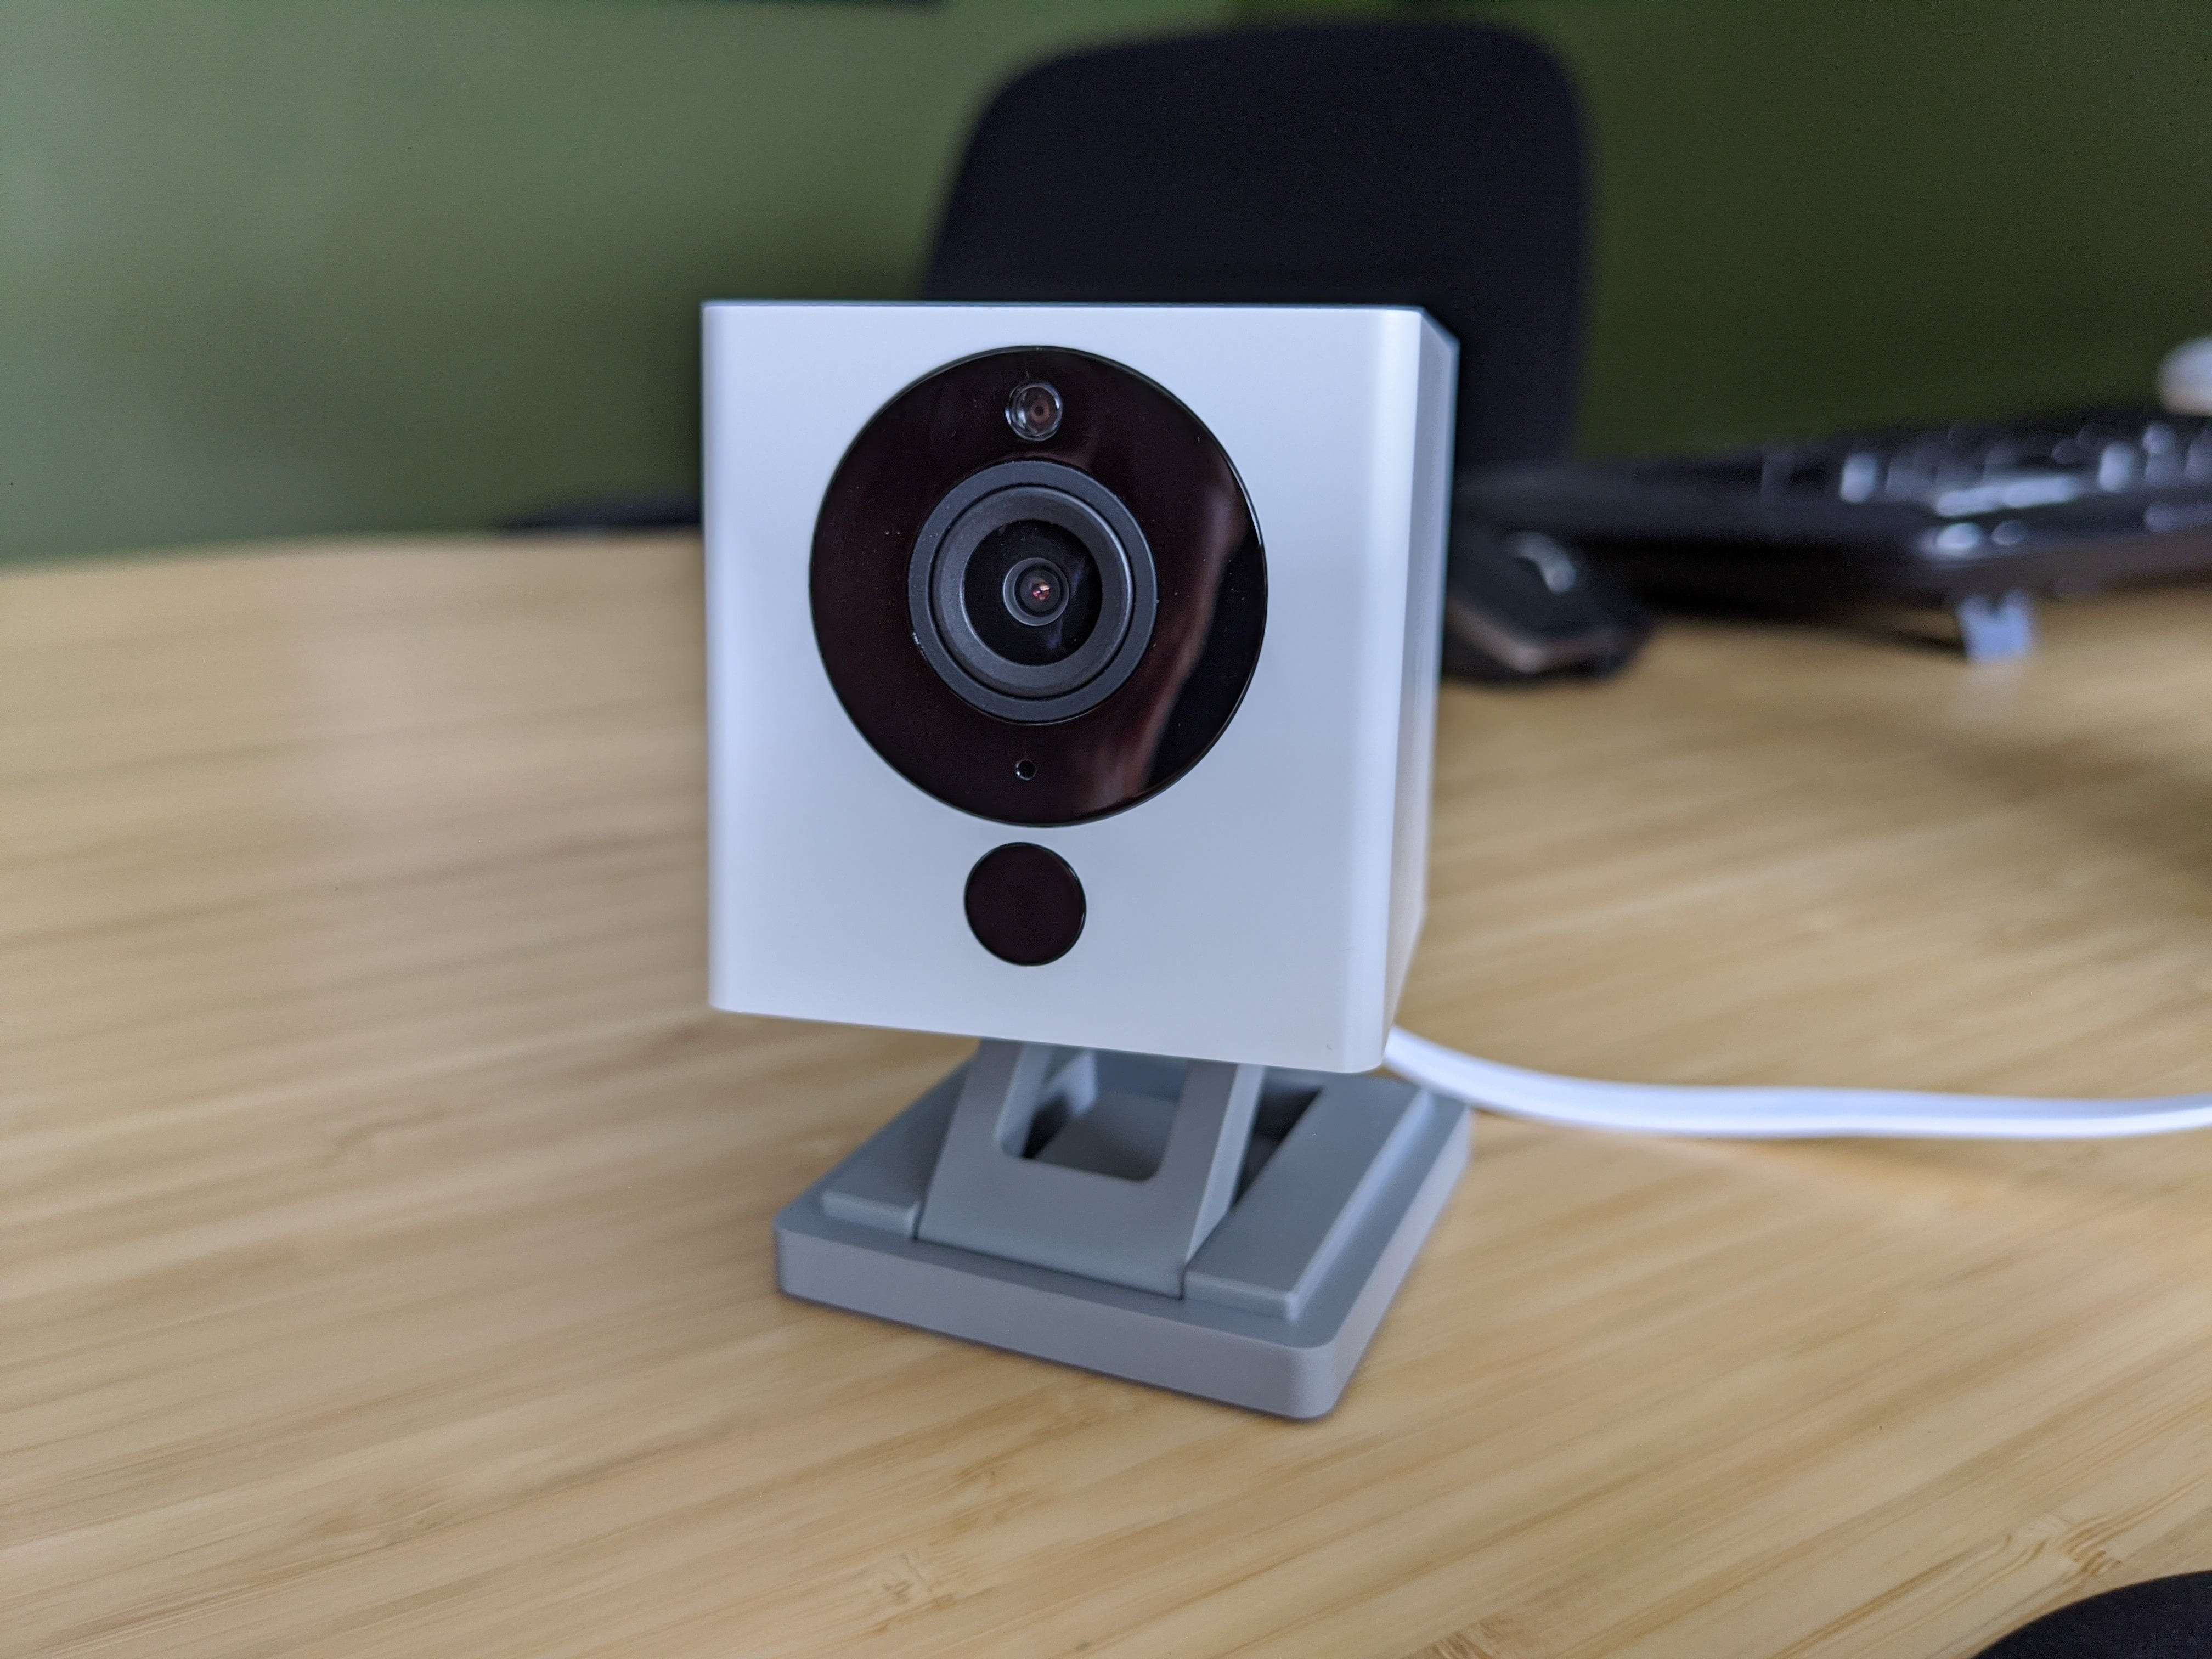 ip camera without delay